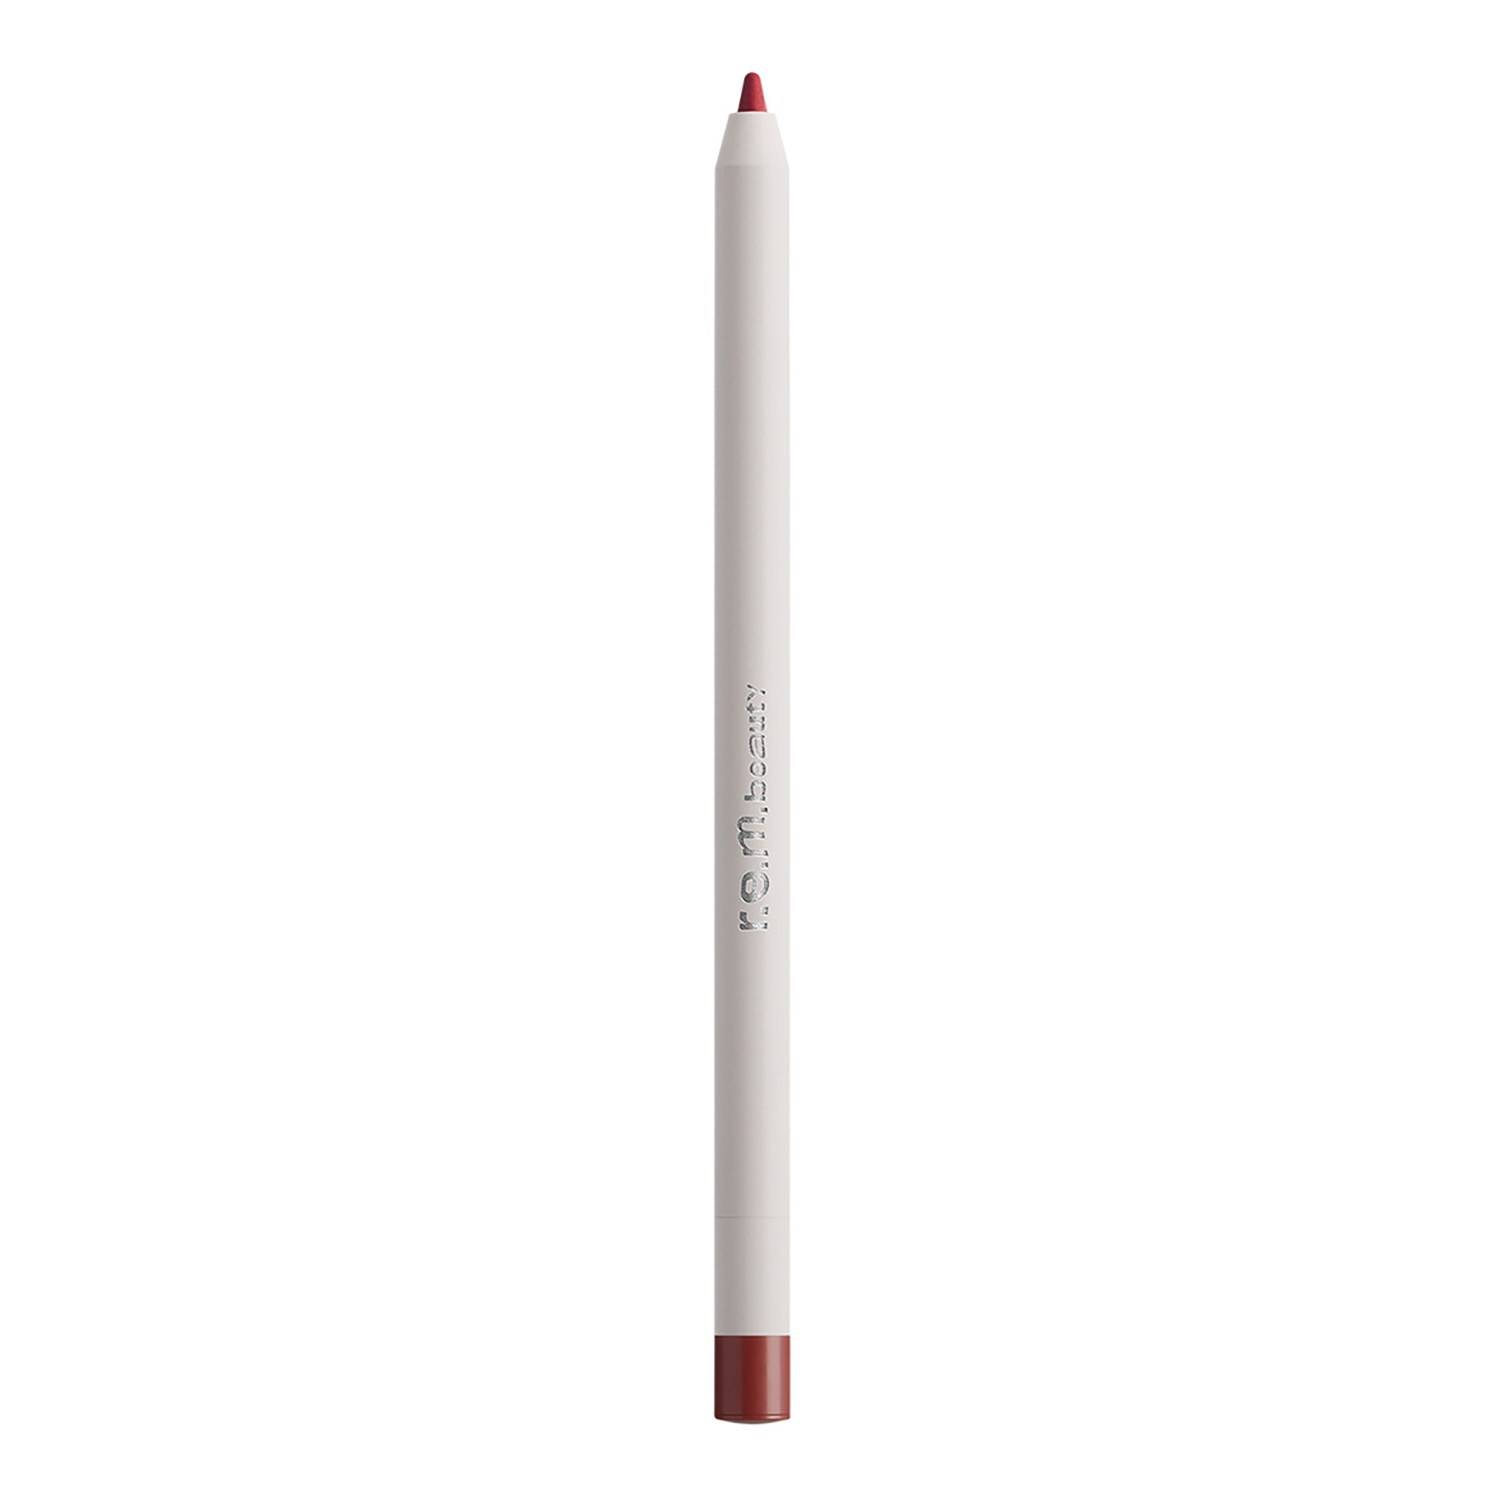 Rem Beauty At The Borderline Lip Liner Pencil 0.5G Melodies Deep True Red